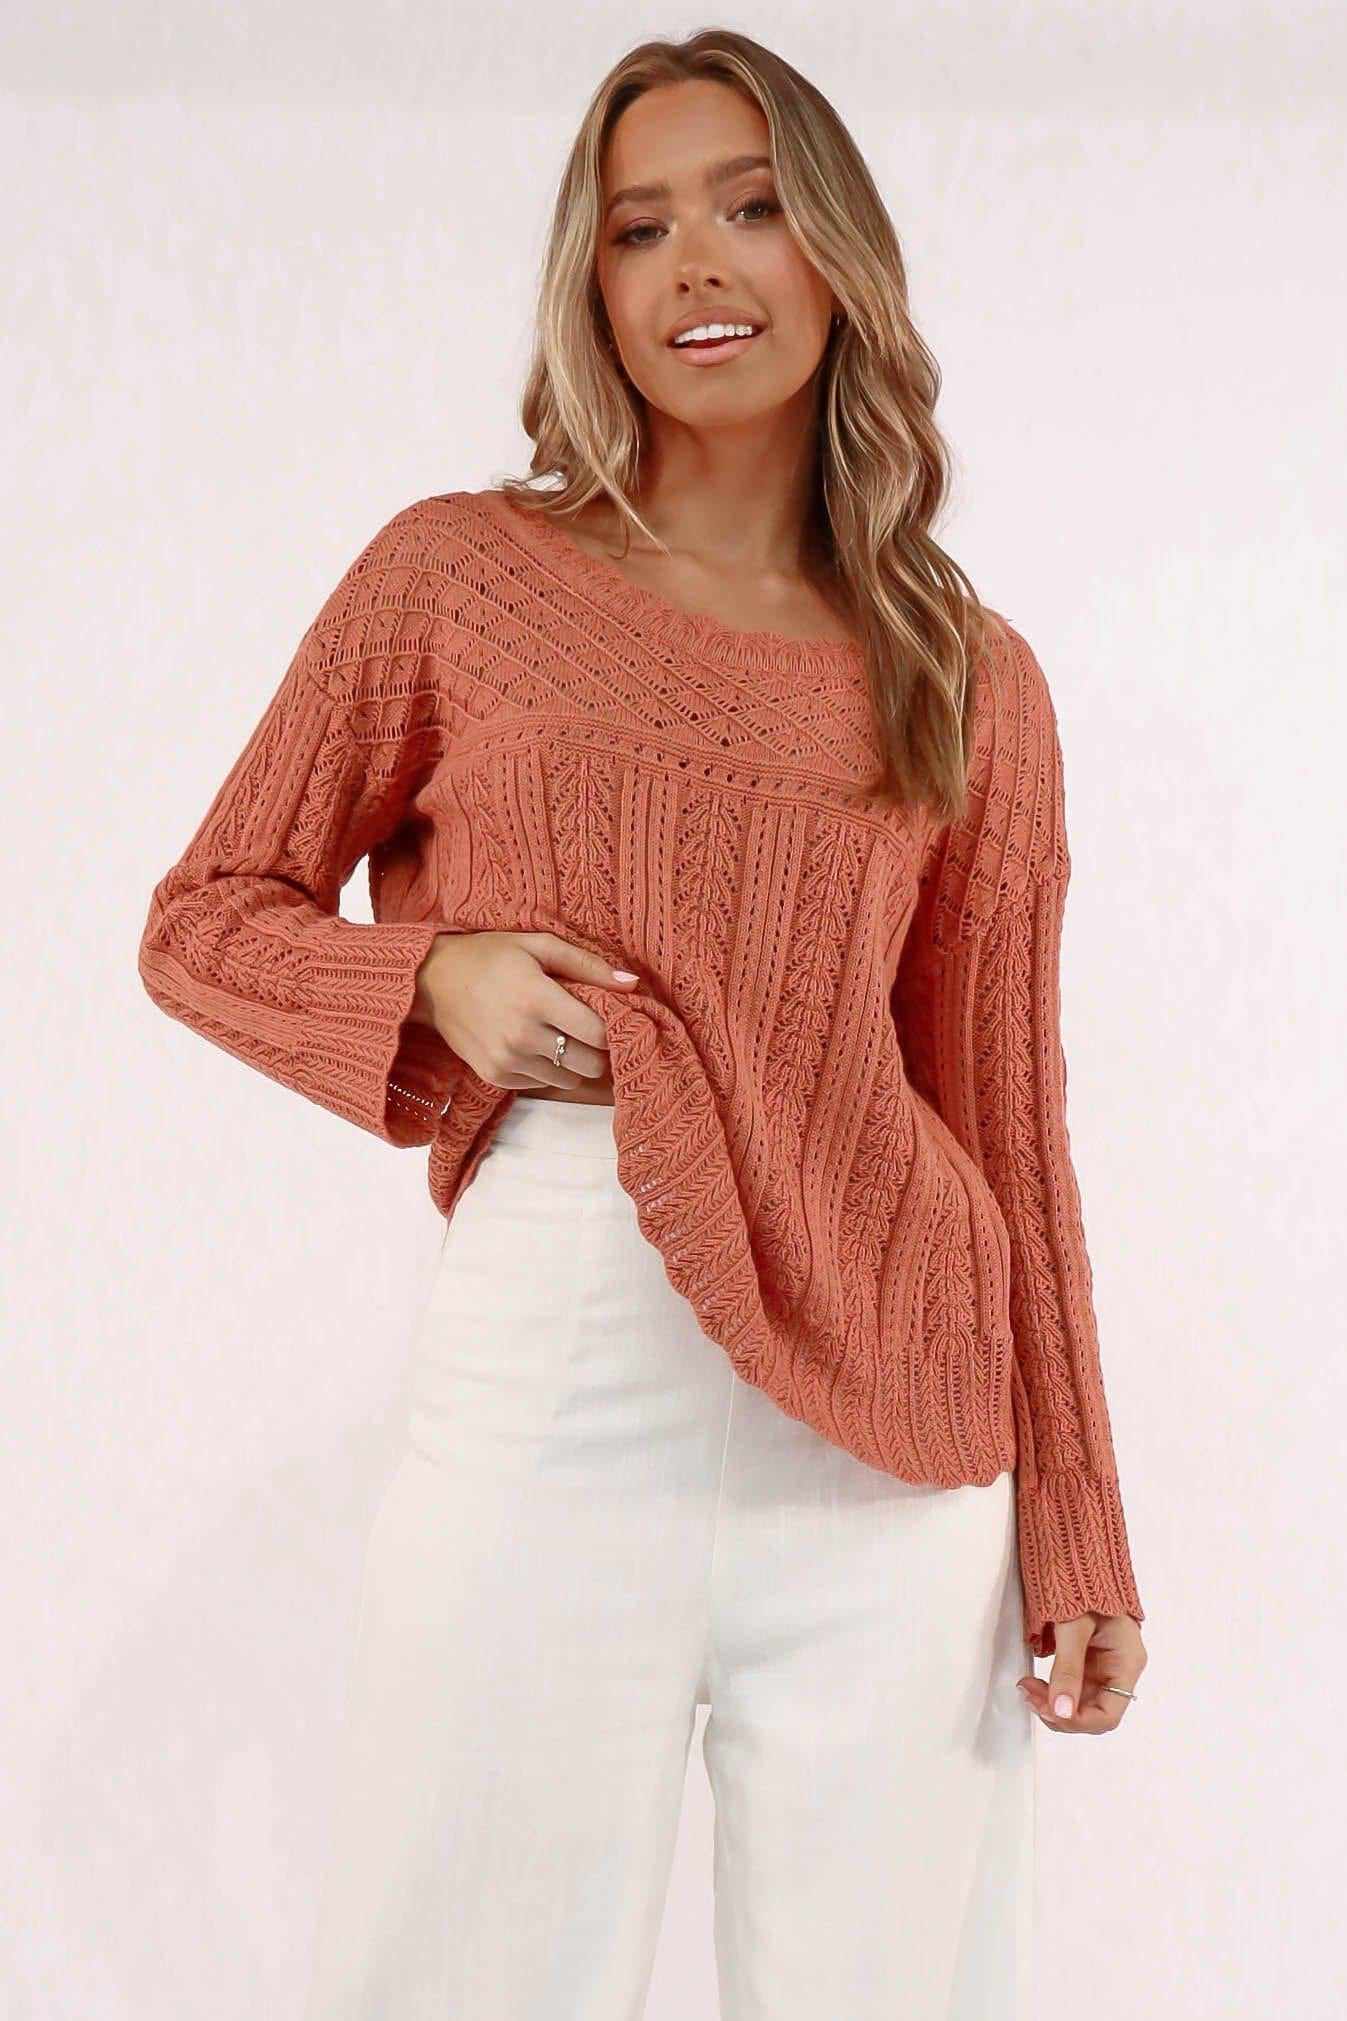 Gillia Top, COTTON, LONG SLEEVE, ORANGE, Sale, TOP, TOPS, Our New Gillia Top Is Now Only $61.00 Exclusive At Mishkah, Our New Gillia Top is now only $61.00-We Have The Latest Women's Tops @ Mishkah Online Fashion Boutique-MISHKAH